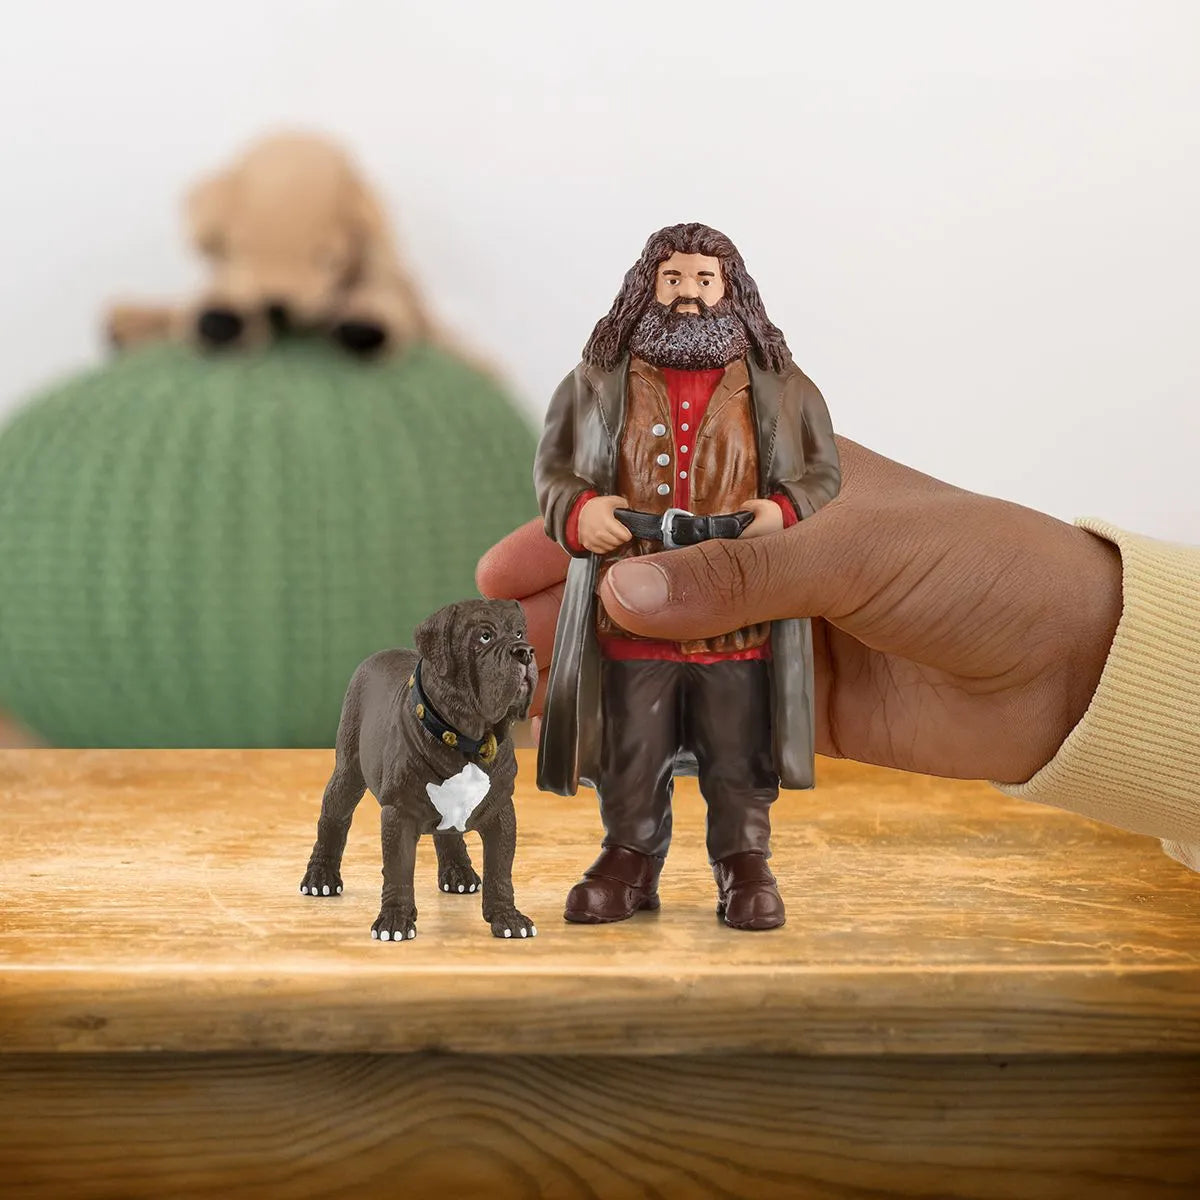 Schleich Harry Potter™ Hagrid™ & Fang – Growing Tree Toys